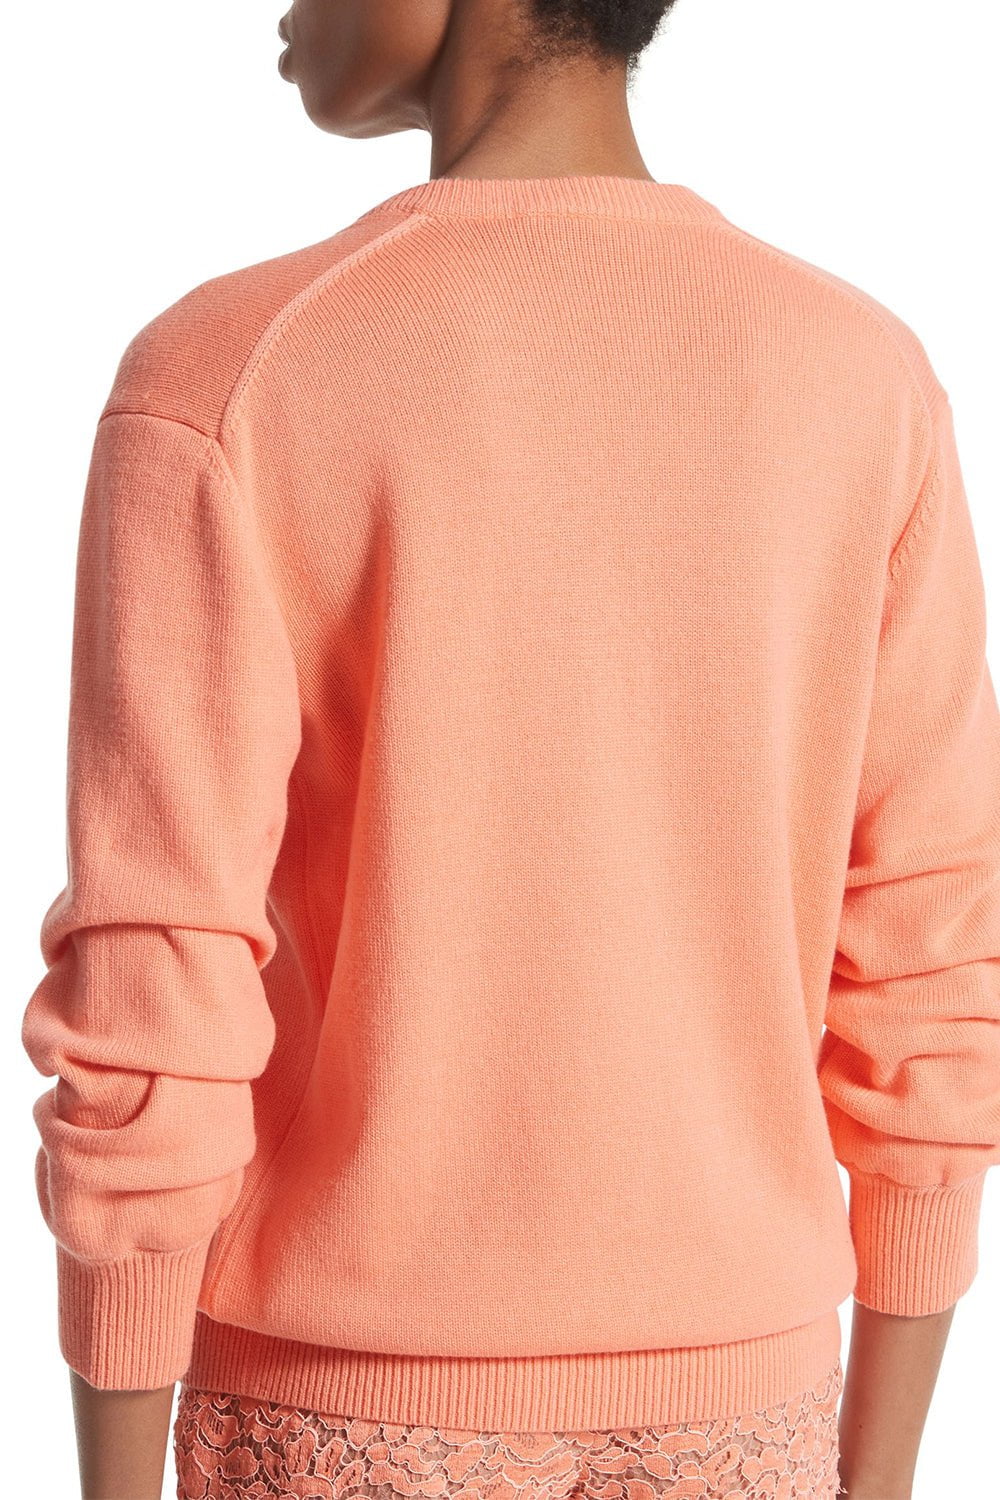 Crushed Sleeve Sweater - Melon CLOTHINGTOPKNITS MICHAEL KORS COLLECTION   